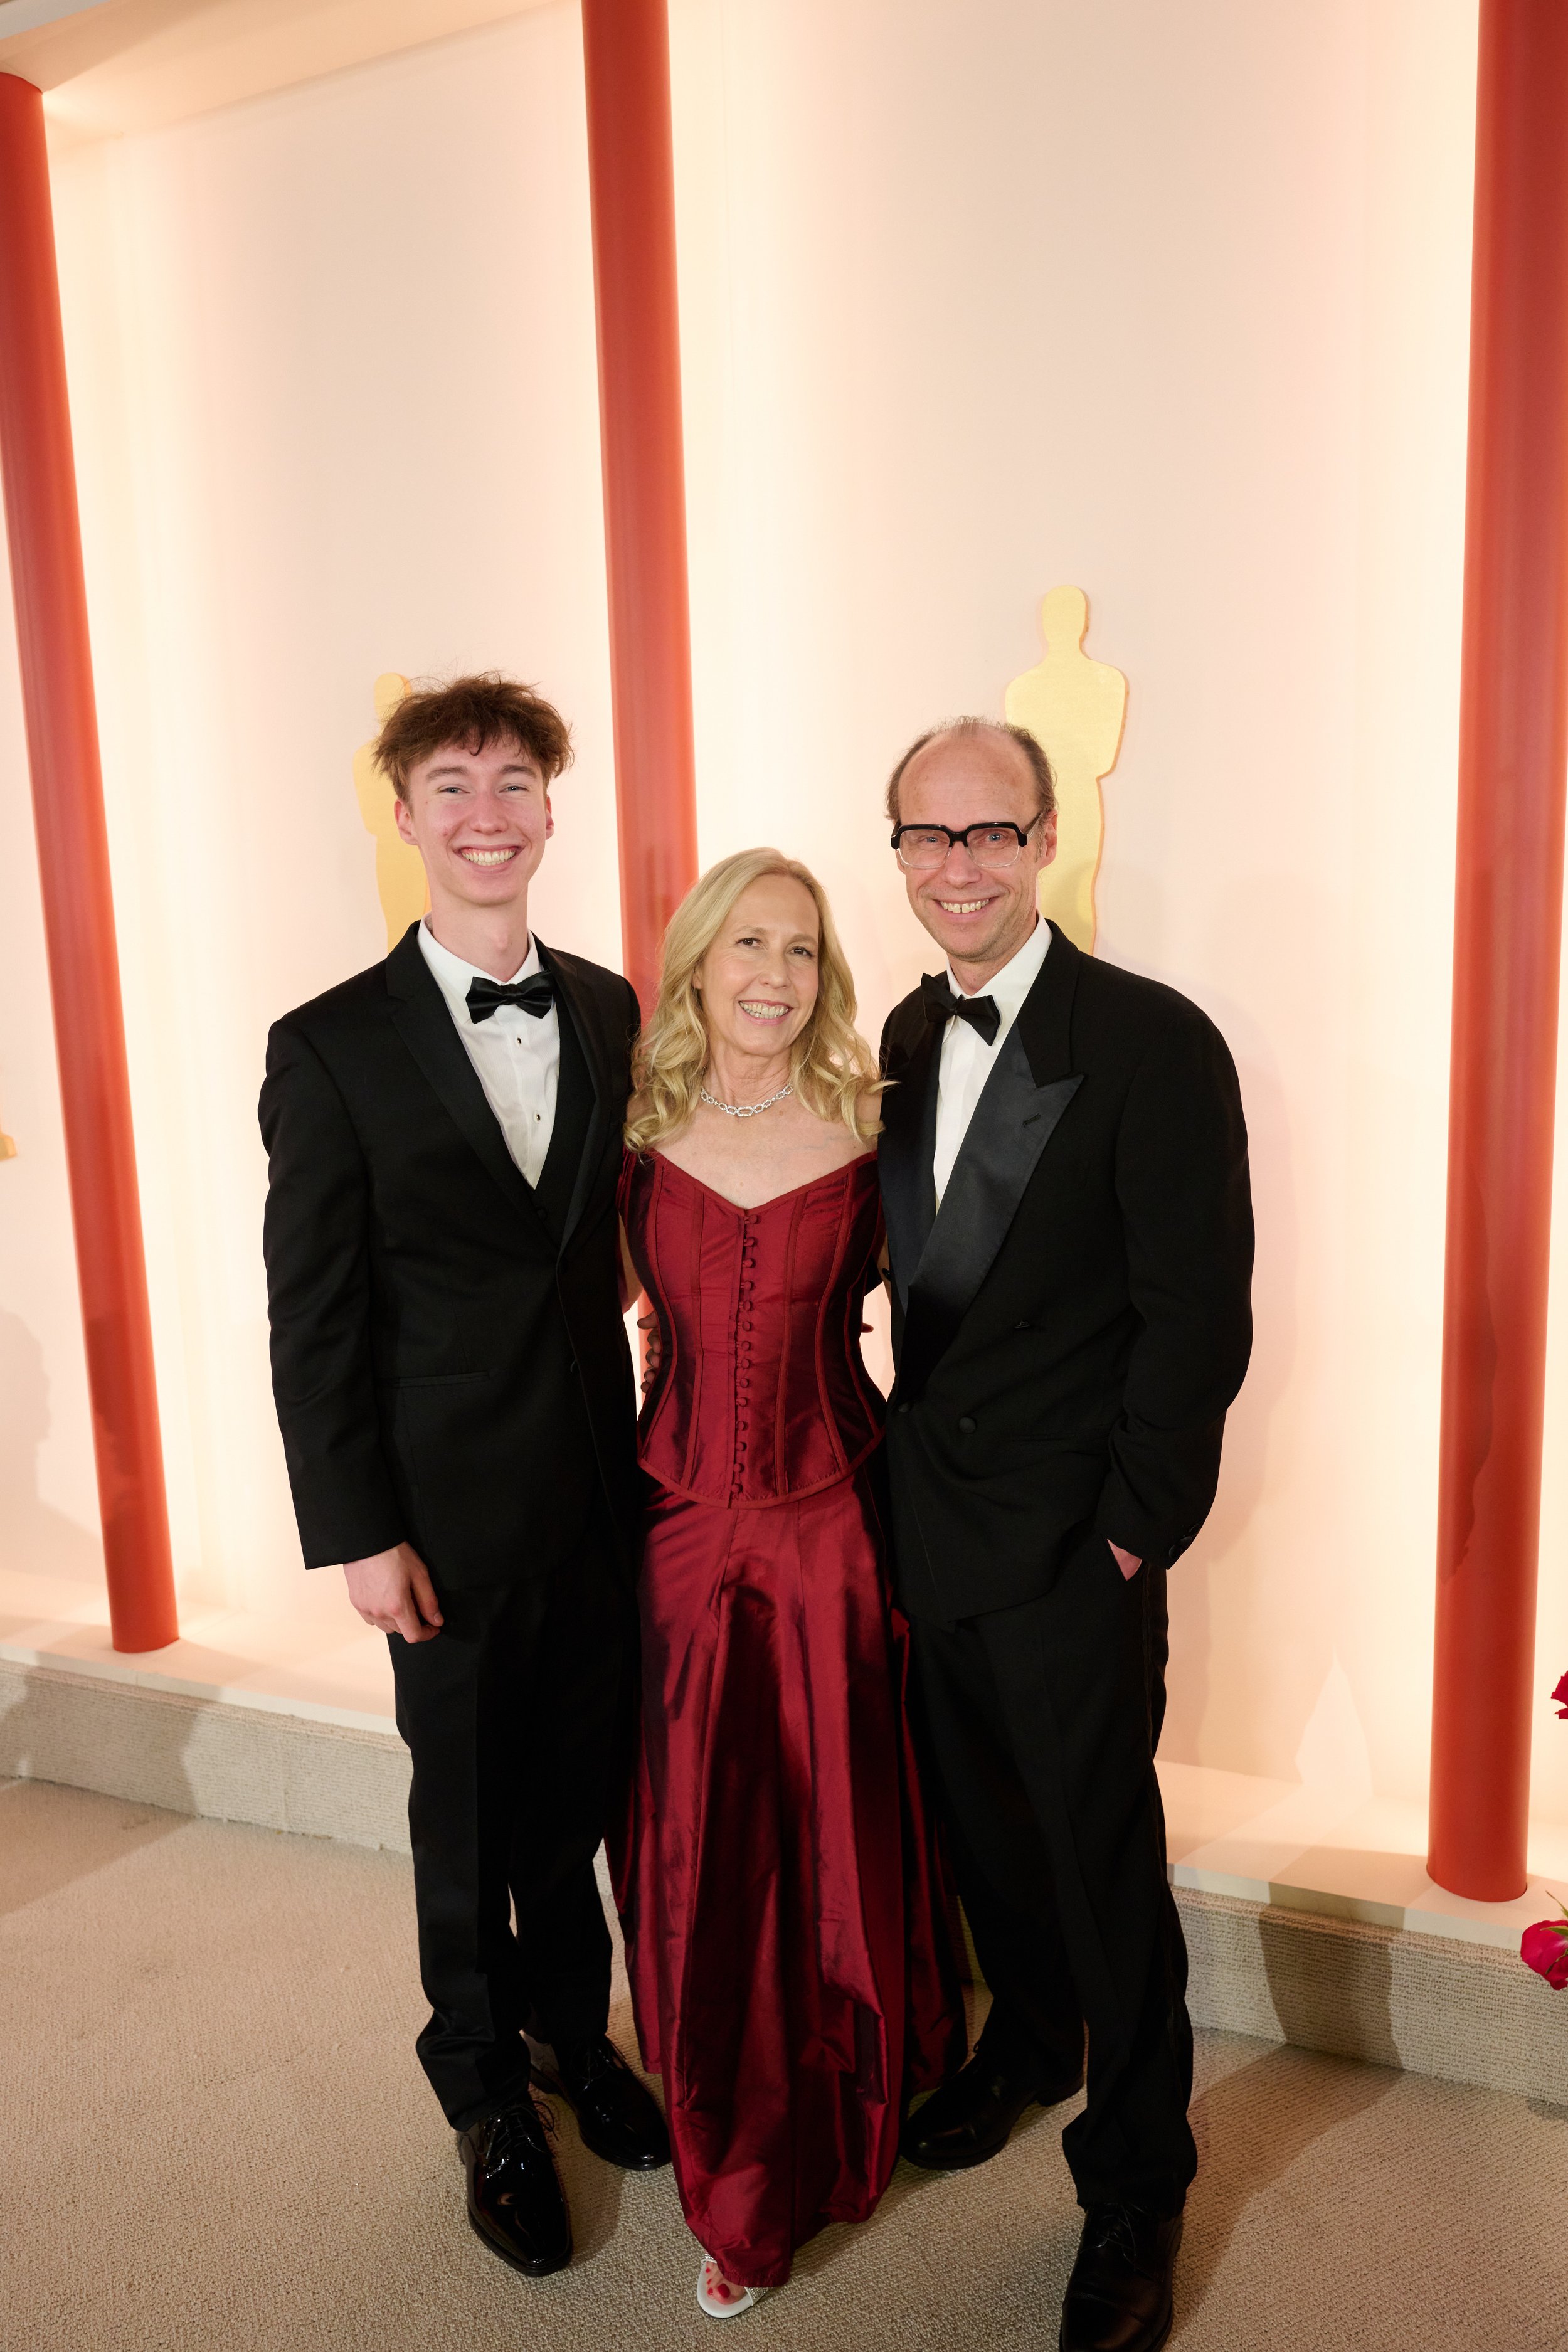 Oscar® nominee Michael Keller arrives with guests on the red carpet of The 95th Oscars® at the Dolby